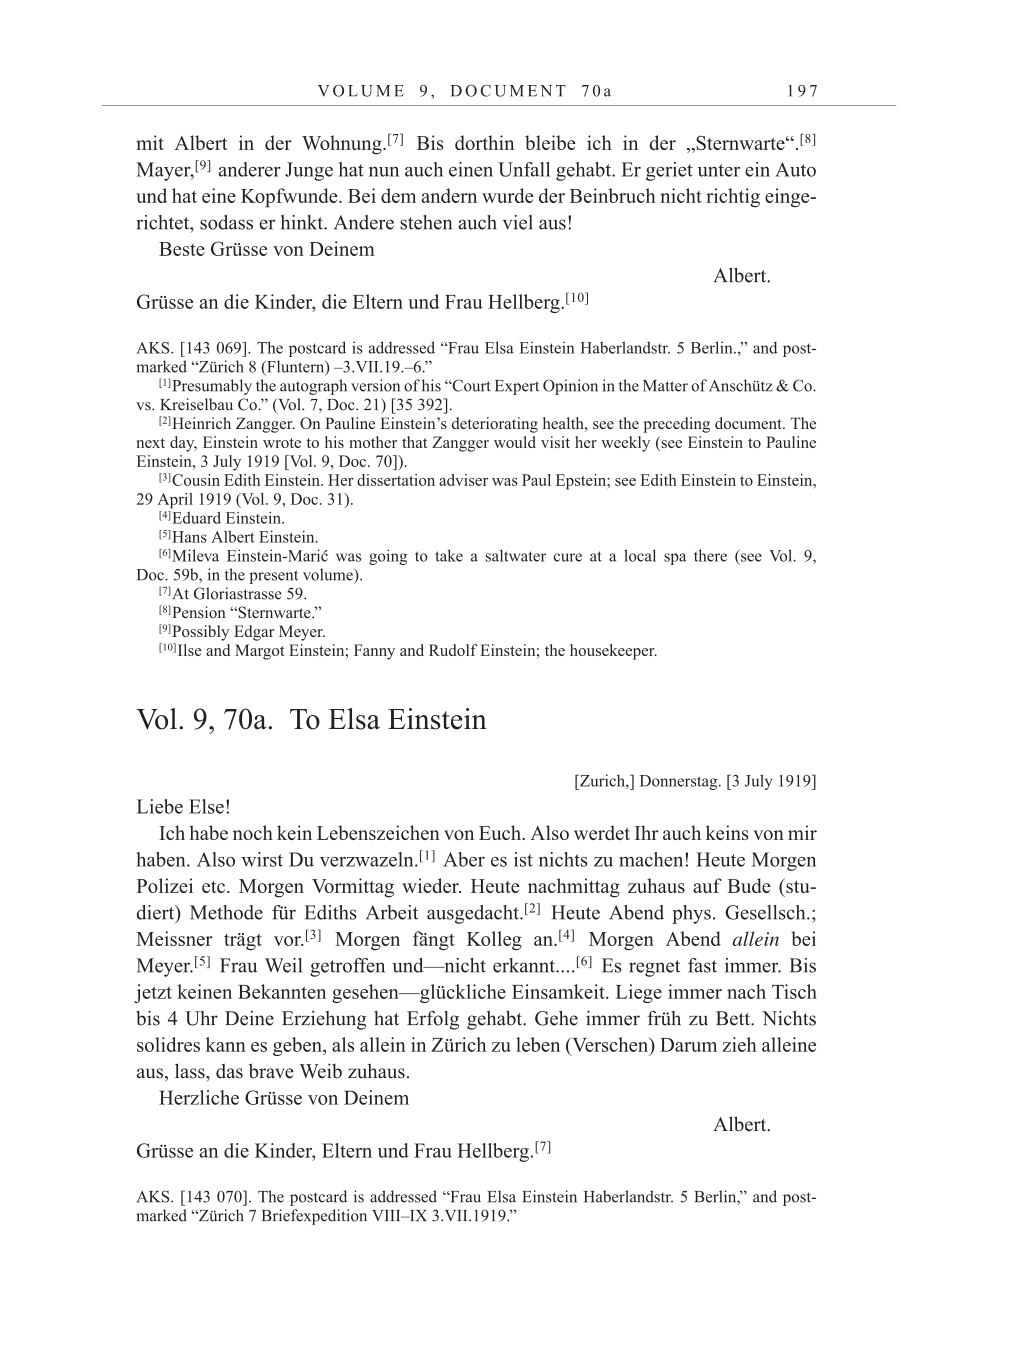 Volume 10: The Berlin Years: Correspondence May-December 1920 / Supplementary Correspondence 1909-1920 page 197